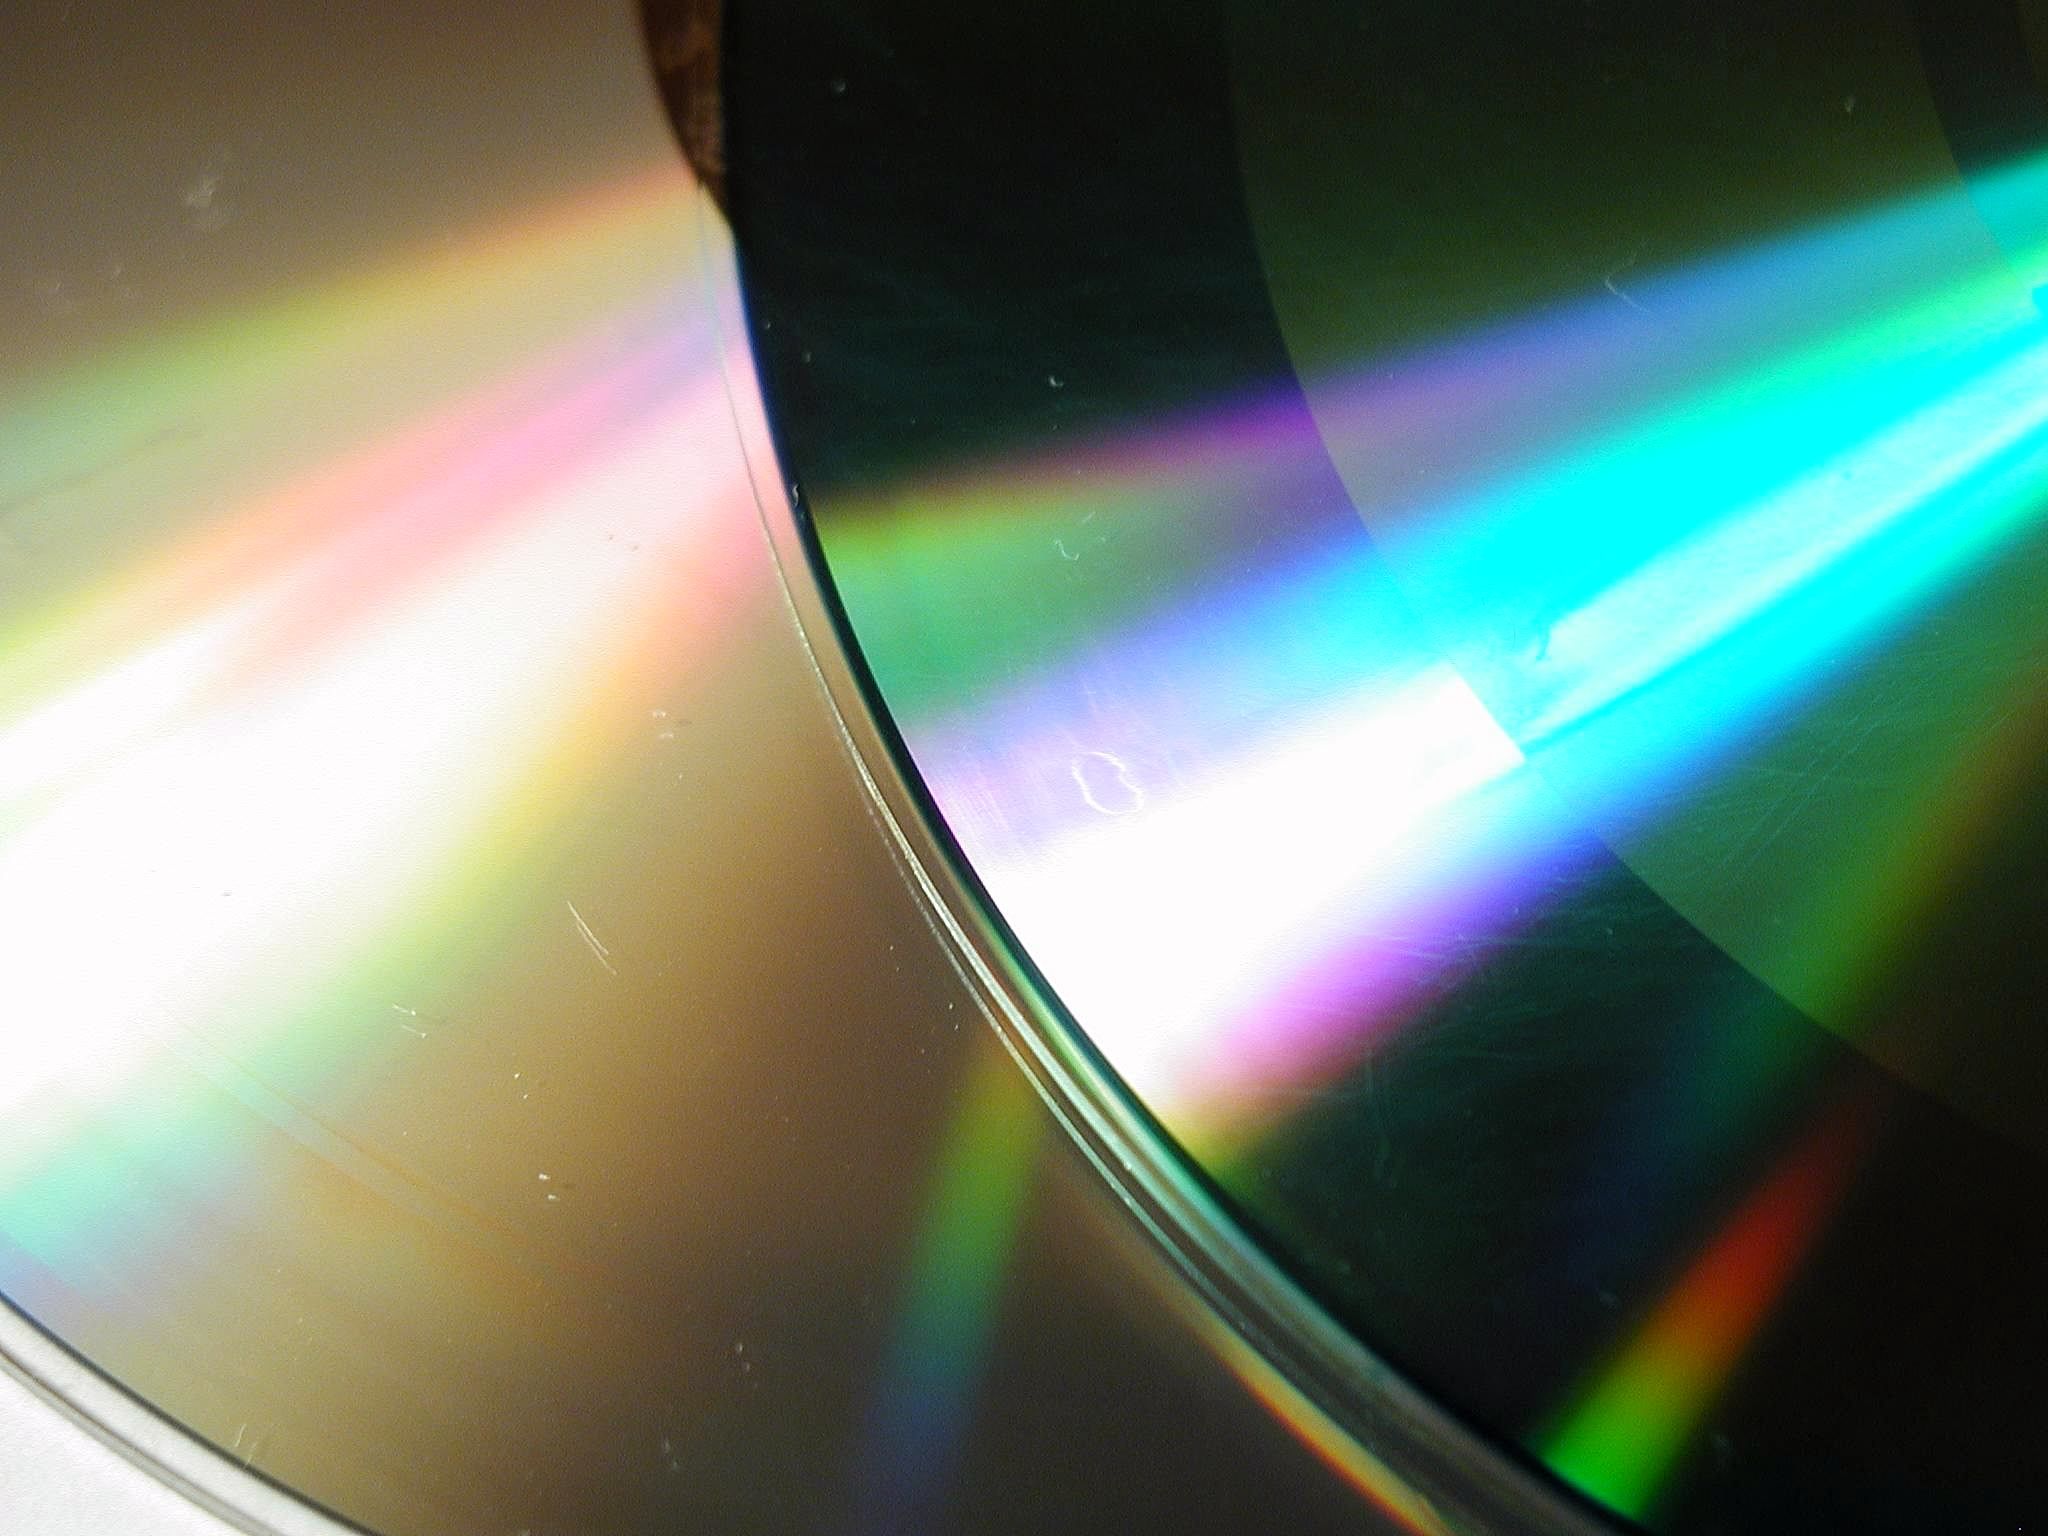 Free picture: rays, disks, computer